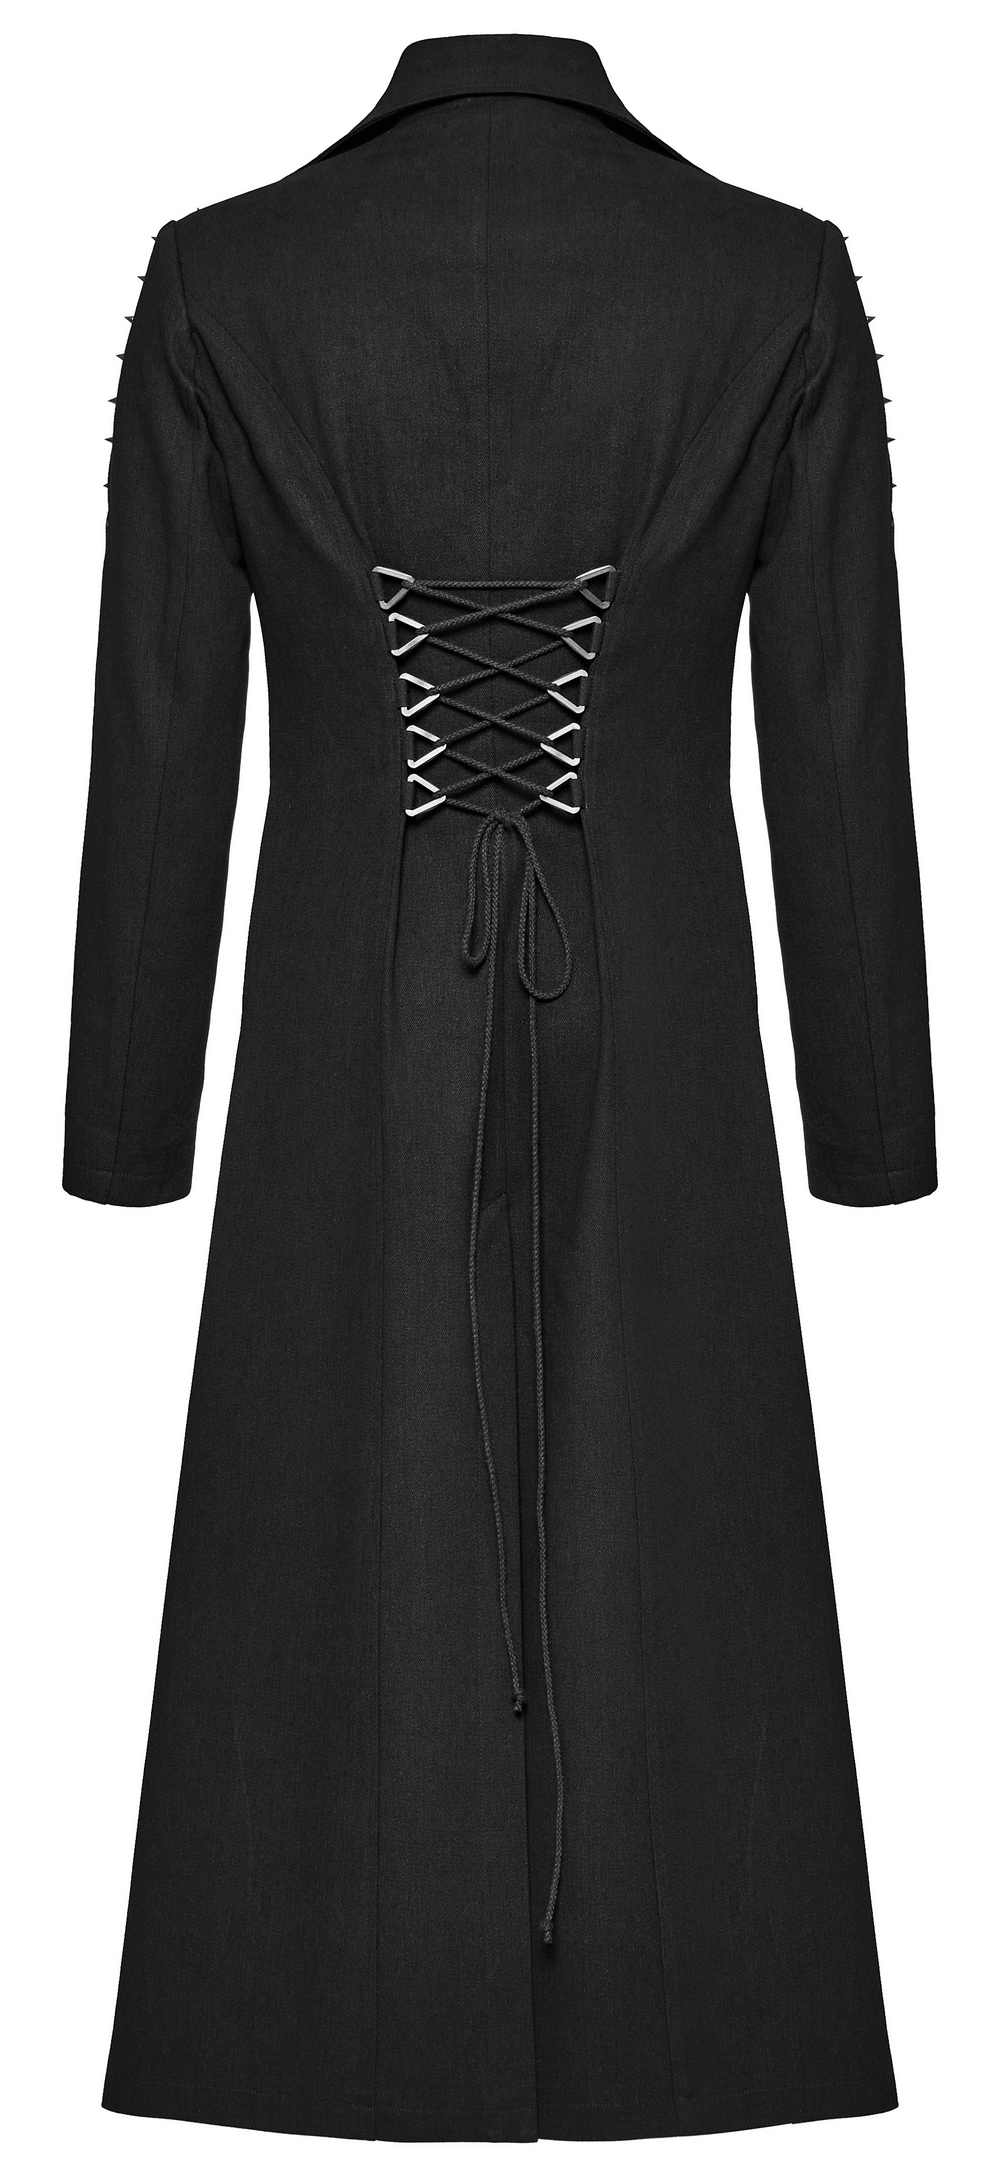 Edgy Punk-Style Long Coat with Industrial Accents